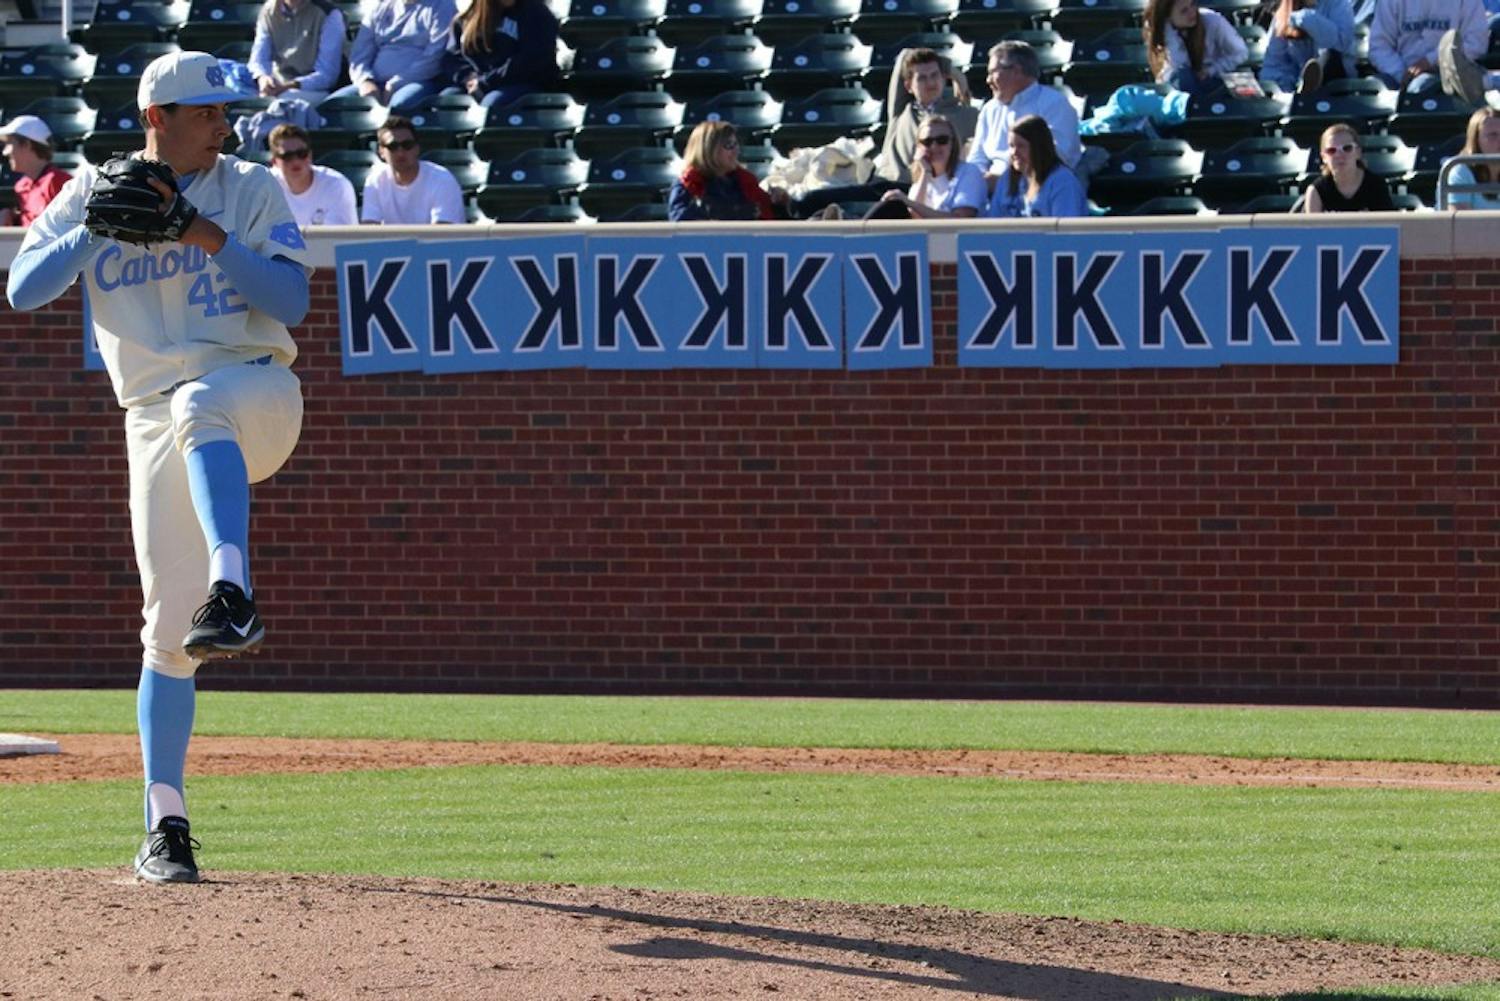 North Carolina pitcher Luca Dalatri (42) struck out 15 batters at Sunday's game against Radford. It was the most strikeouts thrown by a UNC pitcher since Matt Harvey in 2010.